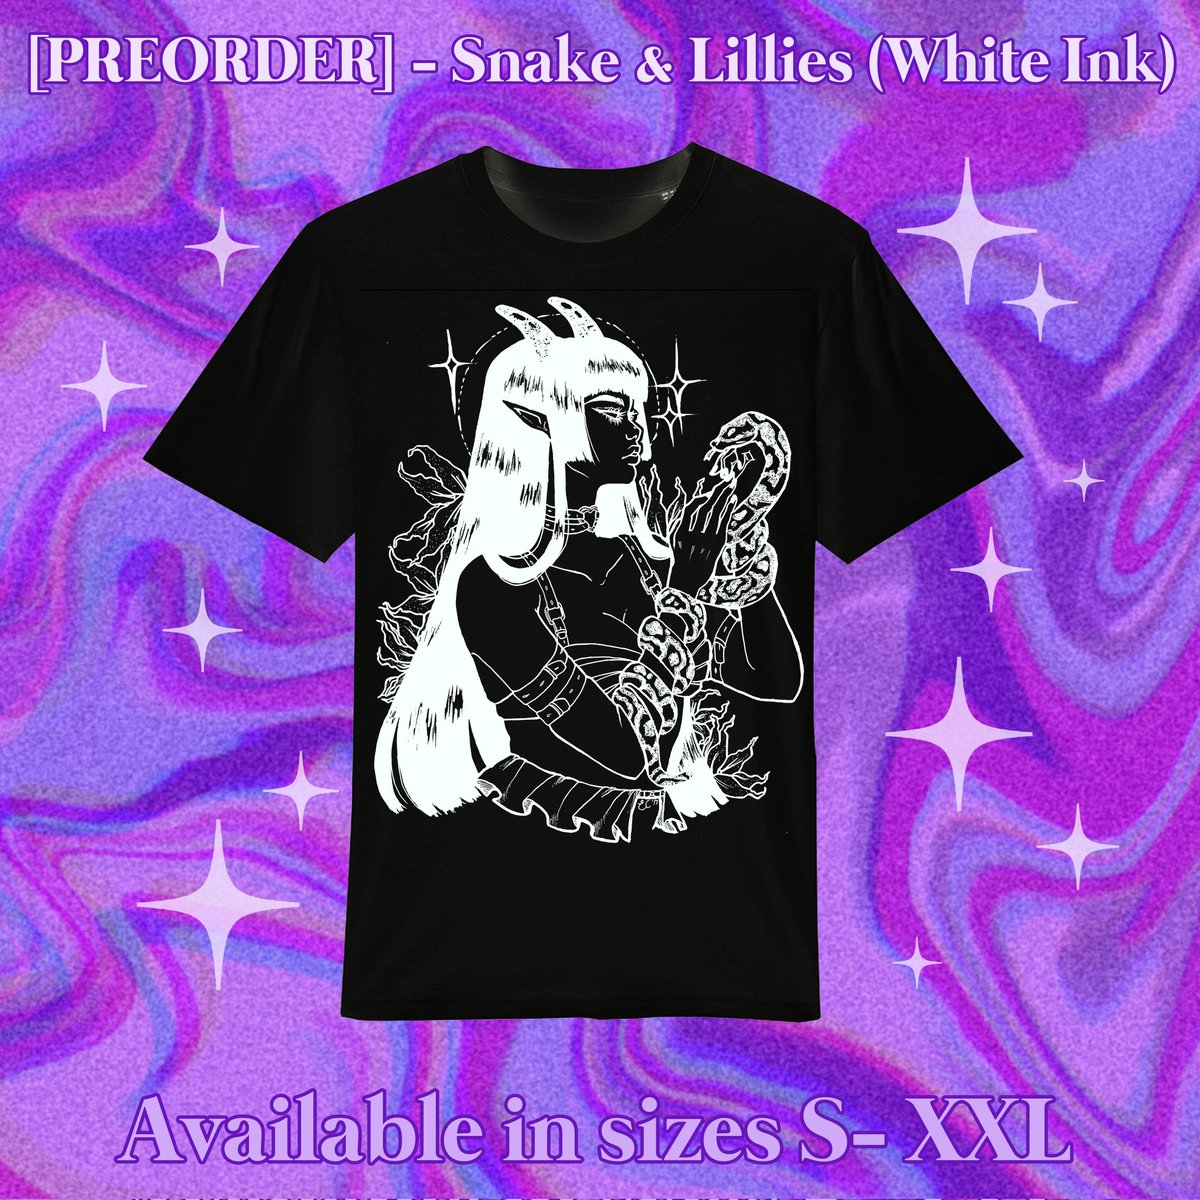 Preorders for our snake shirt restock + new color options will be up on our shop on 4/20!!! Excited to bring back new colors 🛸🍉 Will be posting more new things for the shop update soon!! 👀